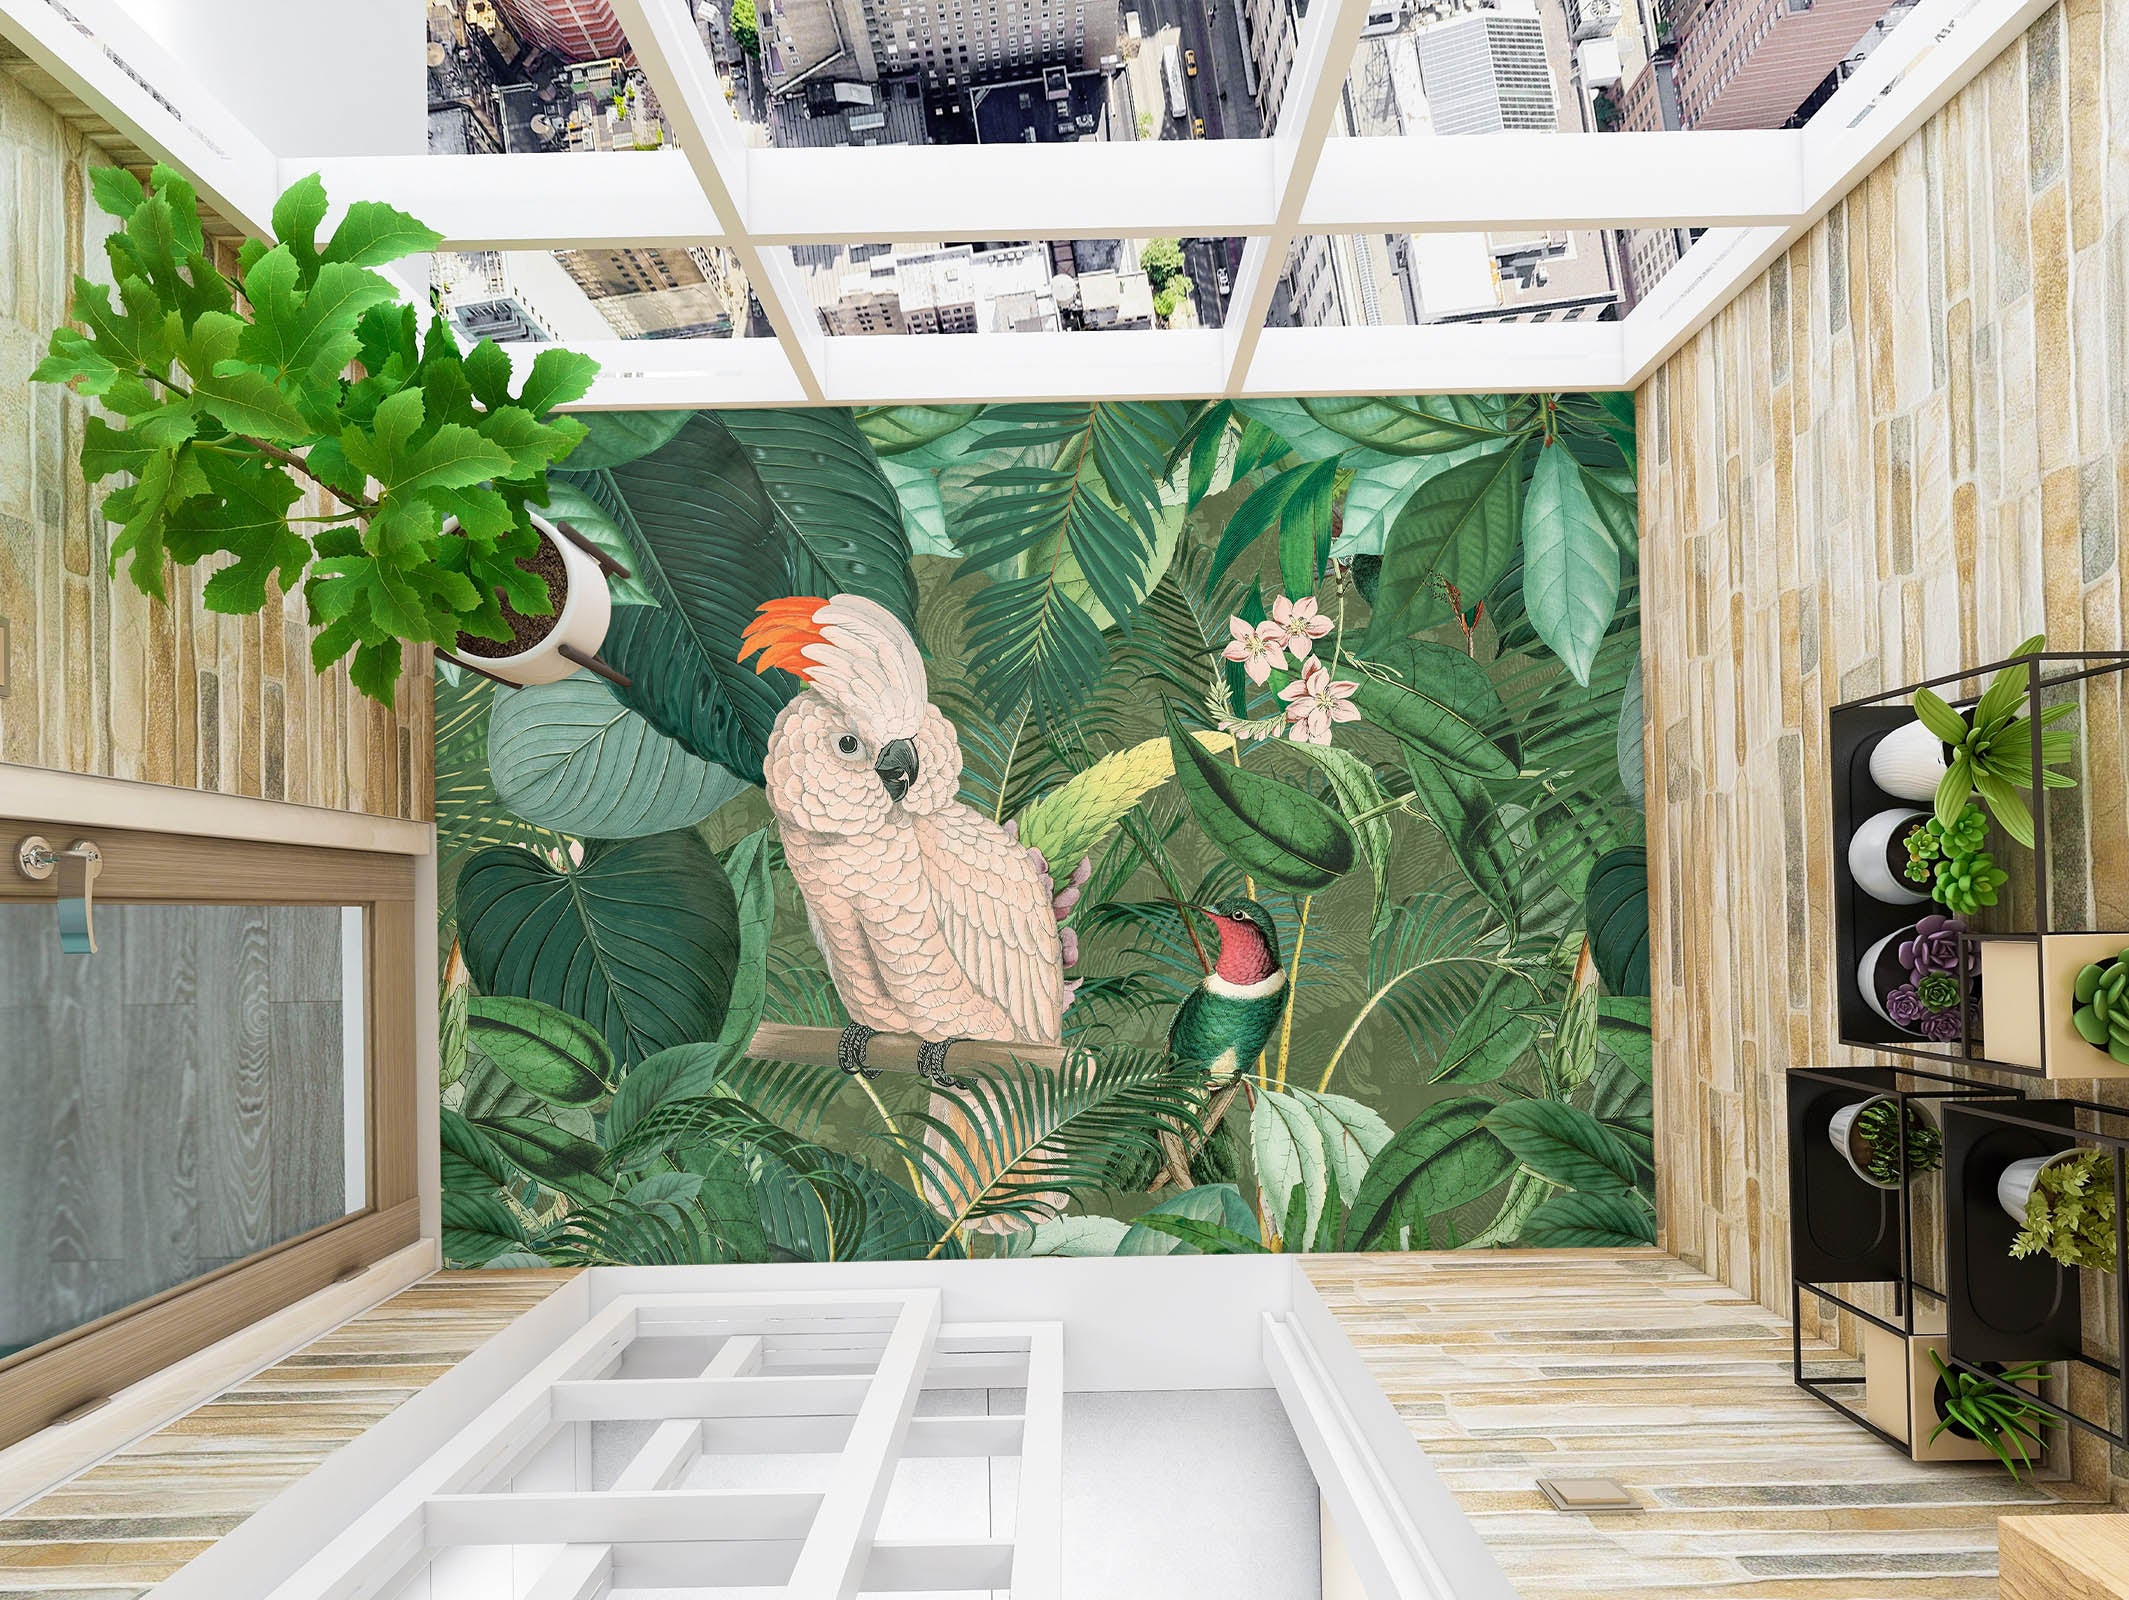 3D Leaves Parrot 104155 Andrea Haase Floor Mural  Wallpaper Murals Self-Adhesive Removable Print Epoxy